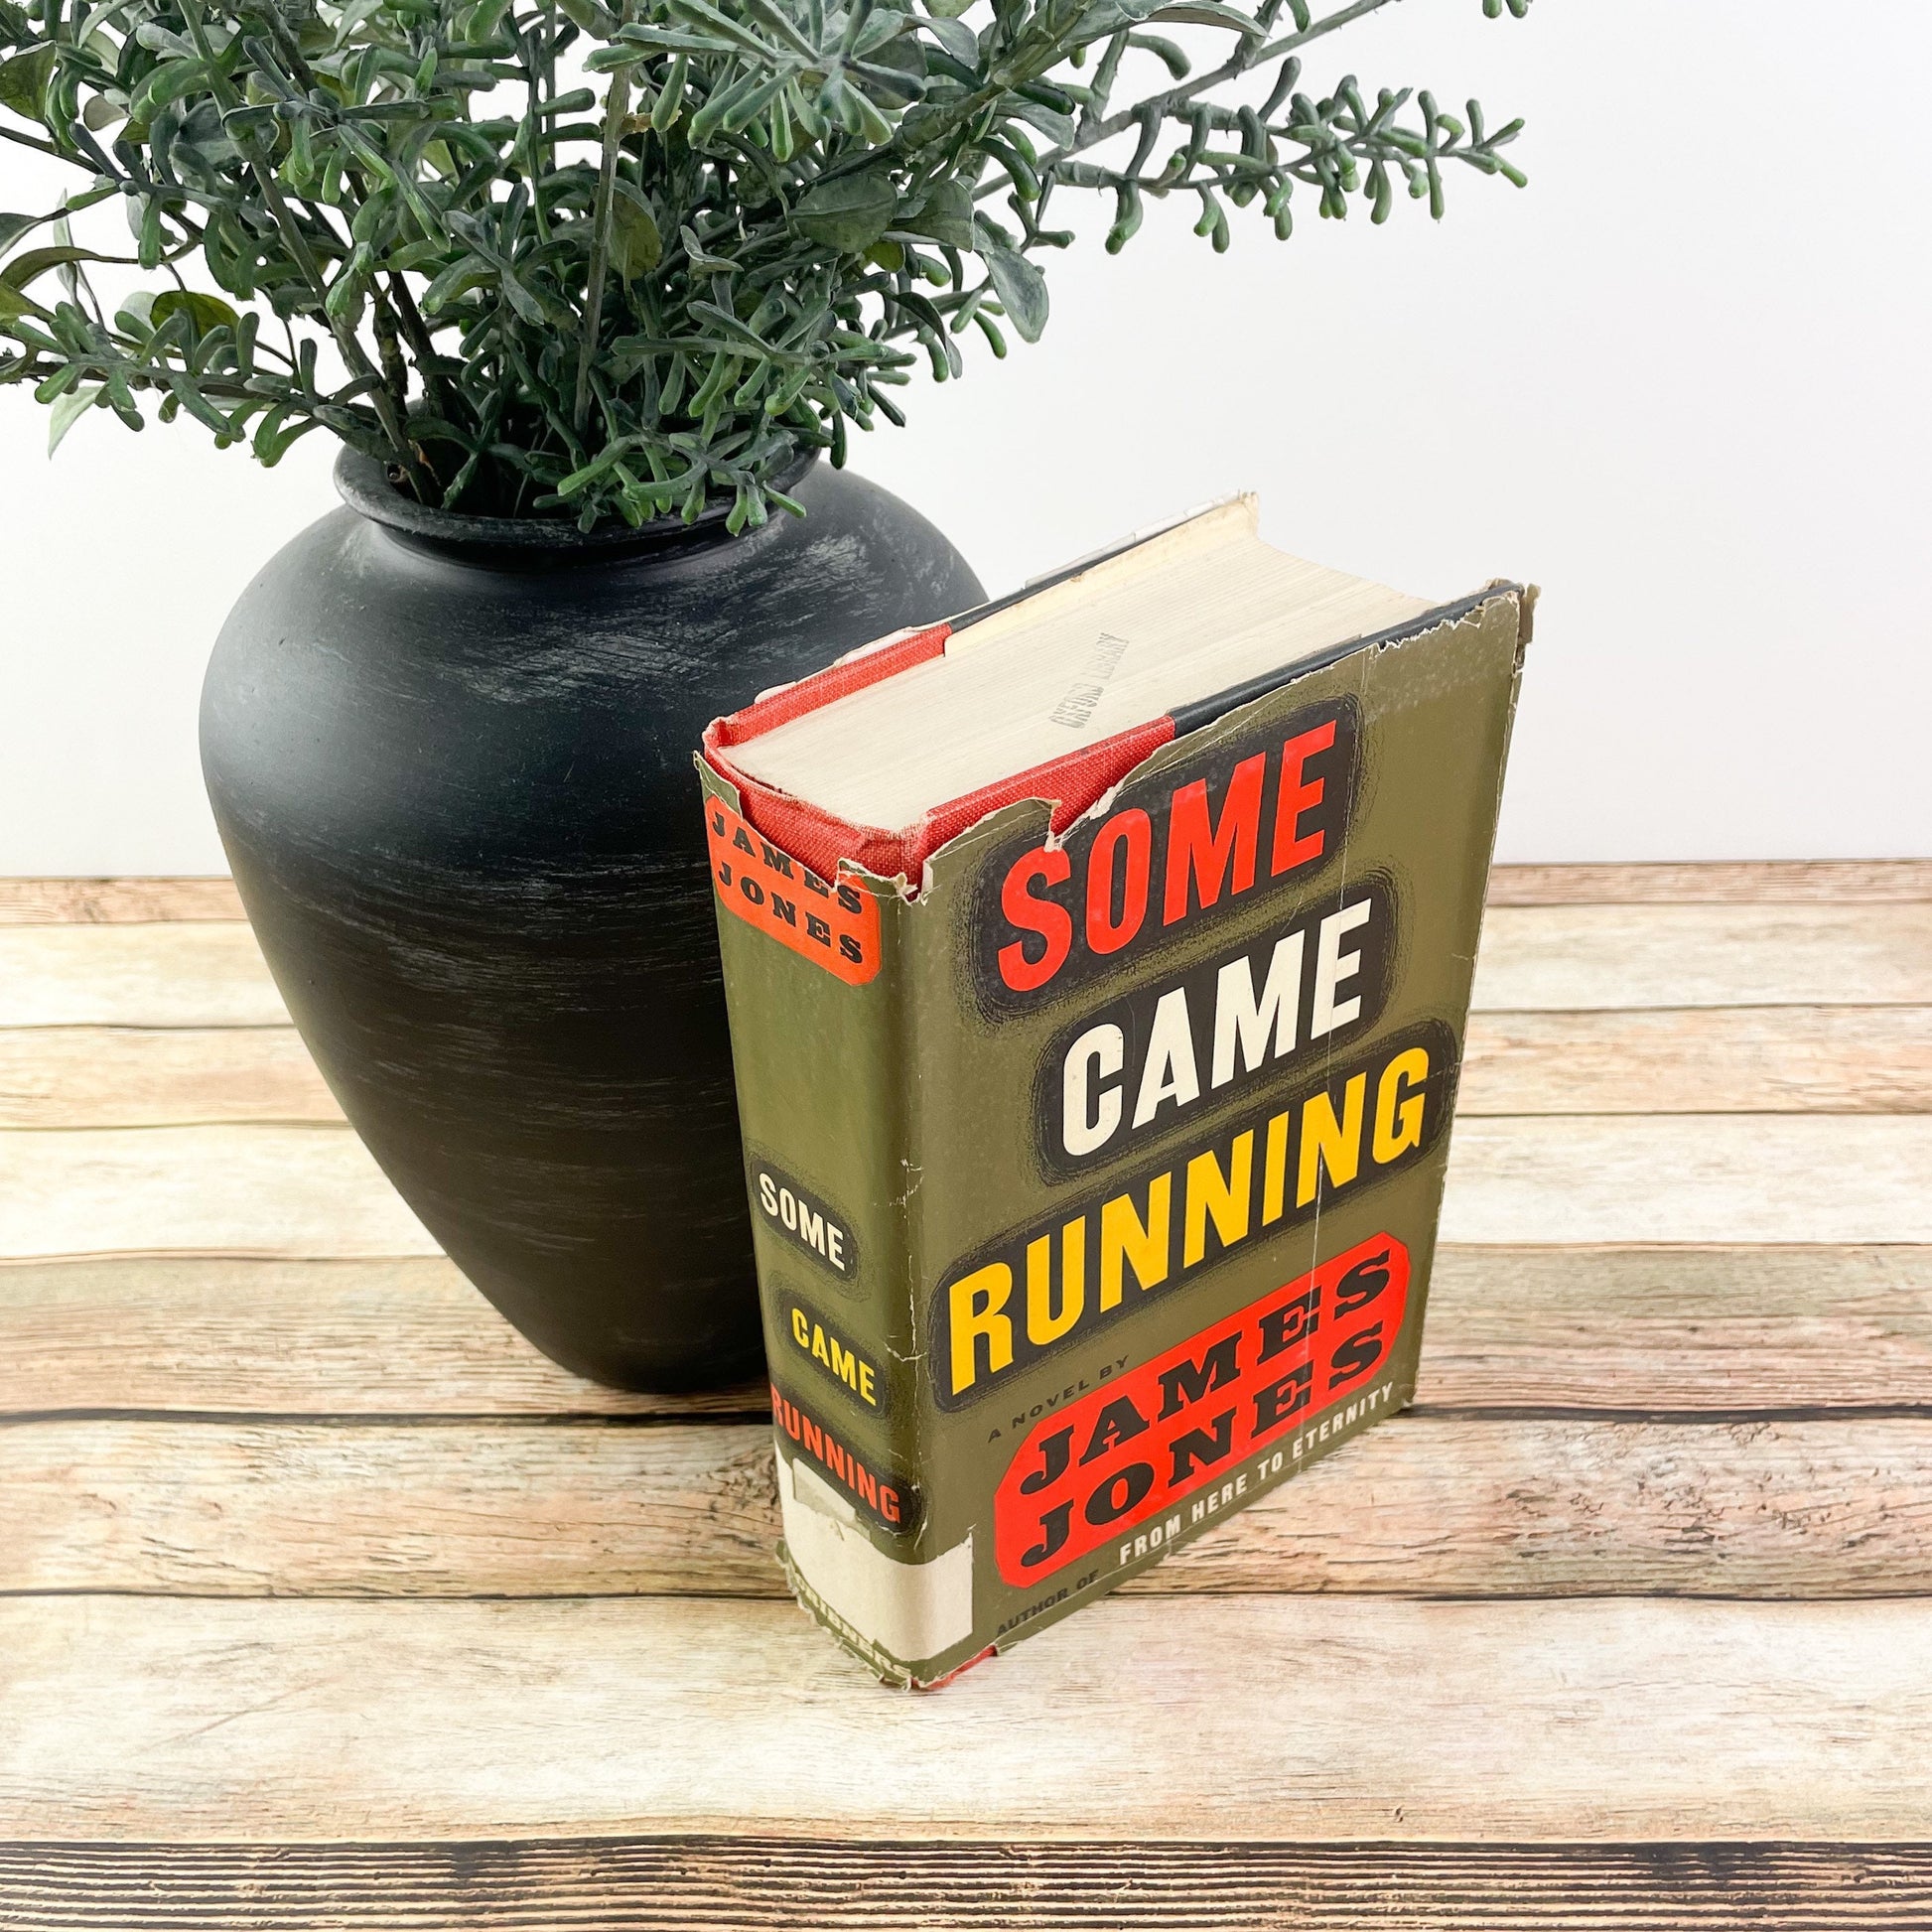 Vintage Book, Some Came Running by James Jones